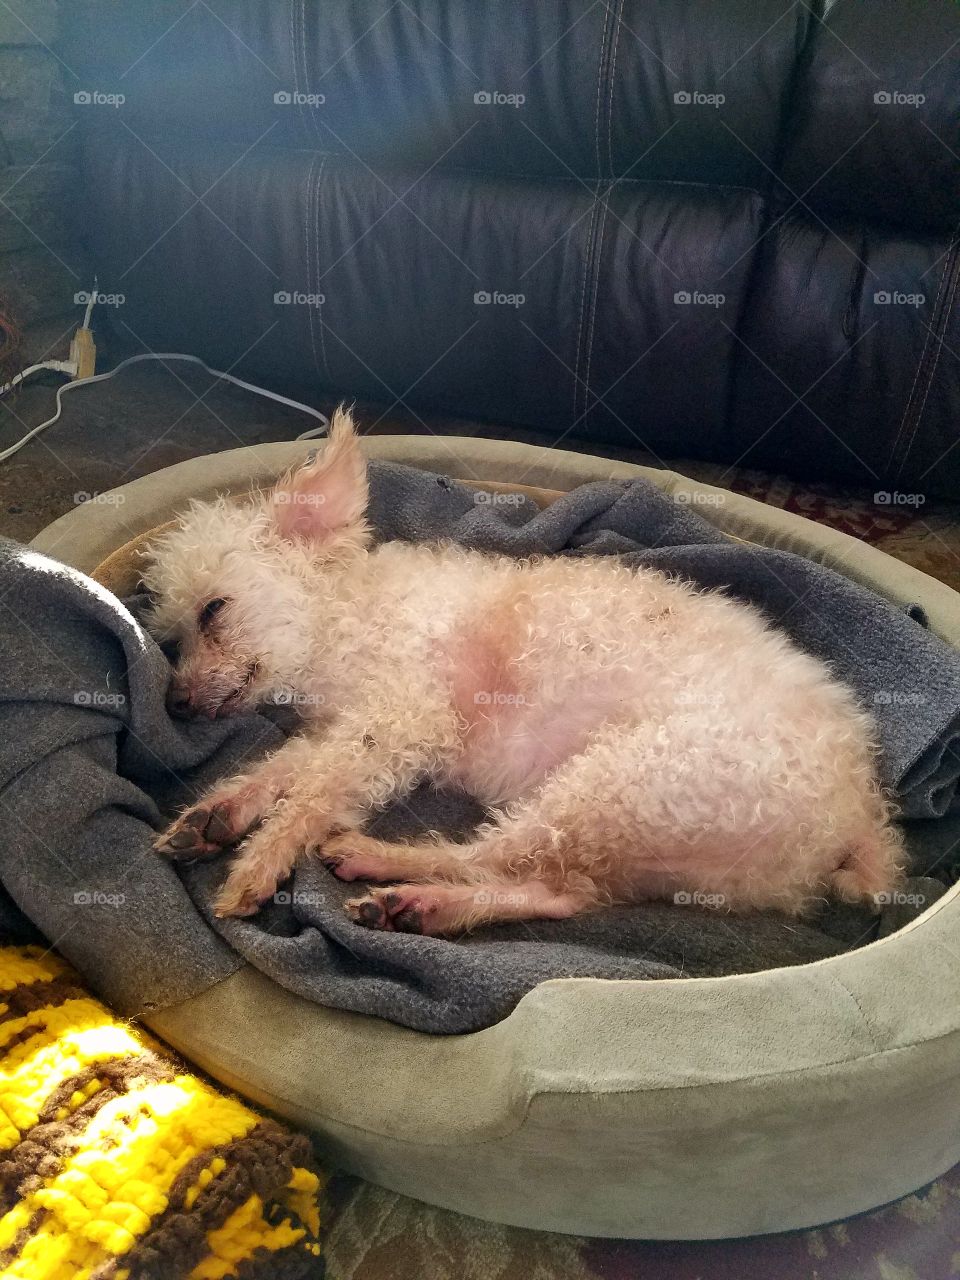 Poodle sleeping in heated bed.